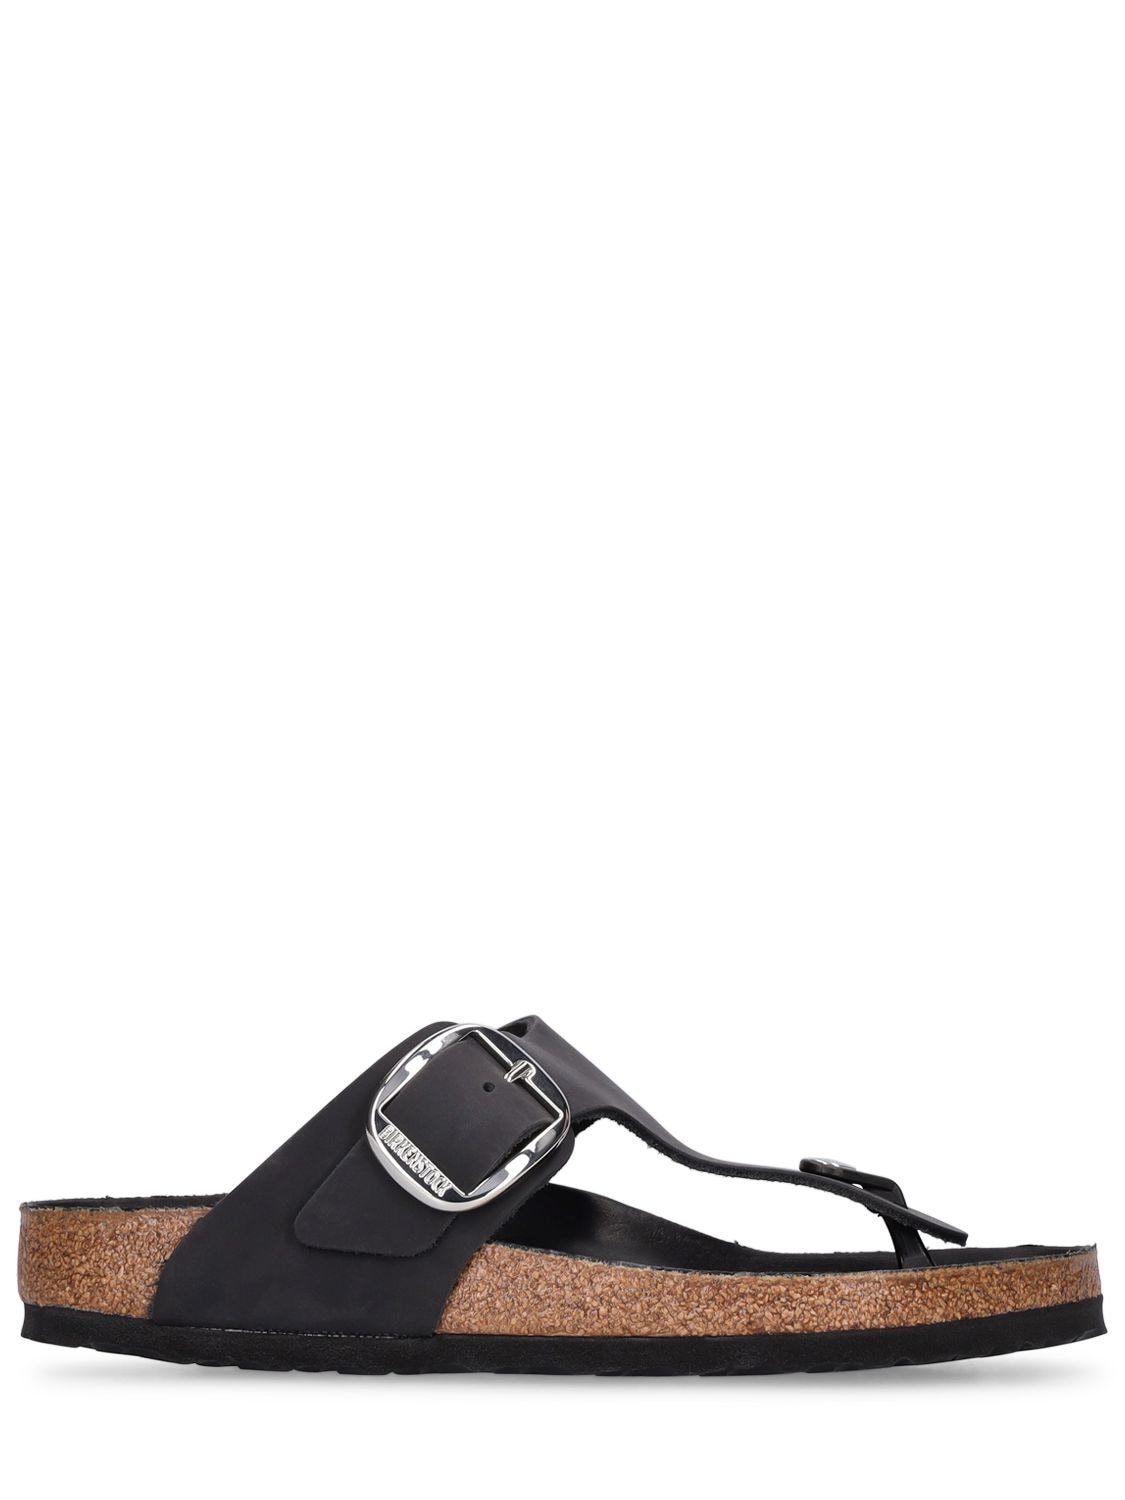 Image of Gizeh Big Buckle Oiled Leather Sandals